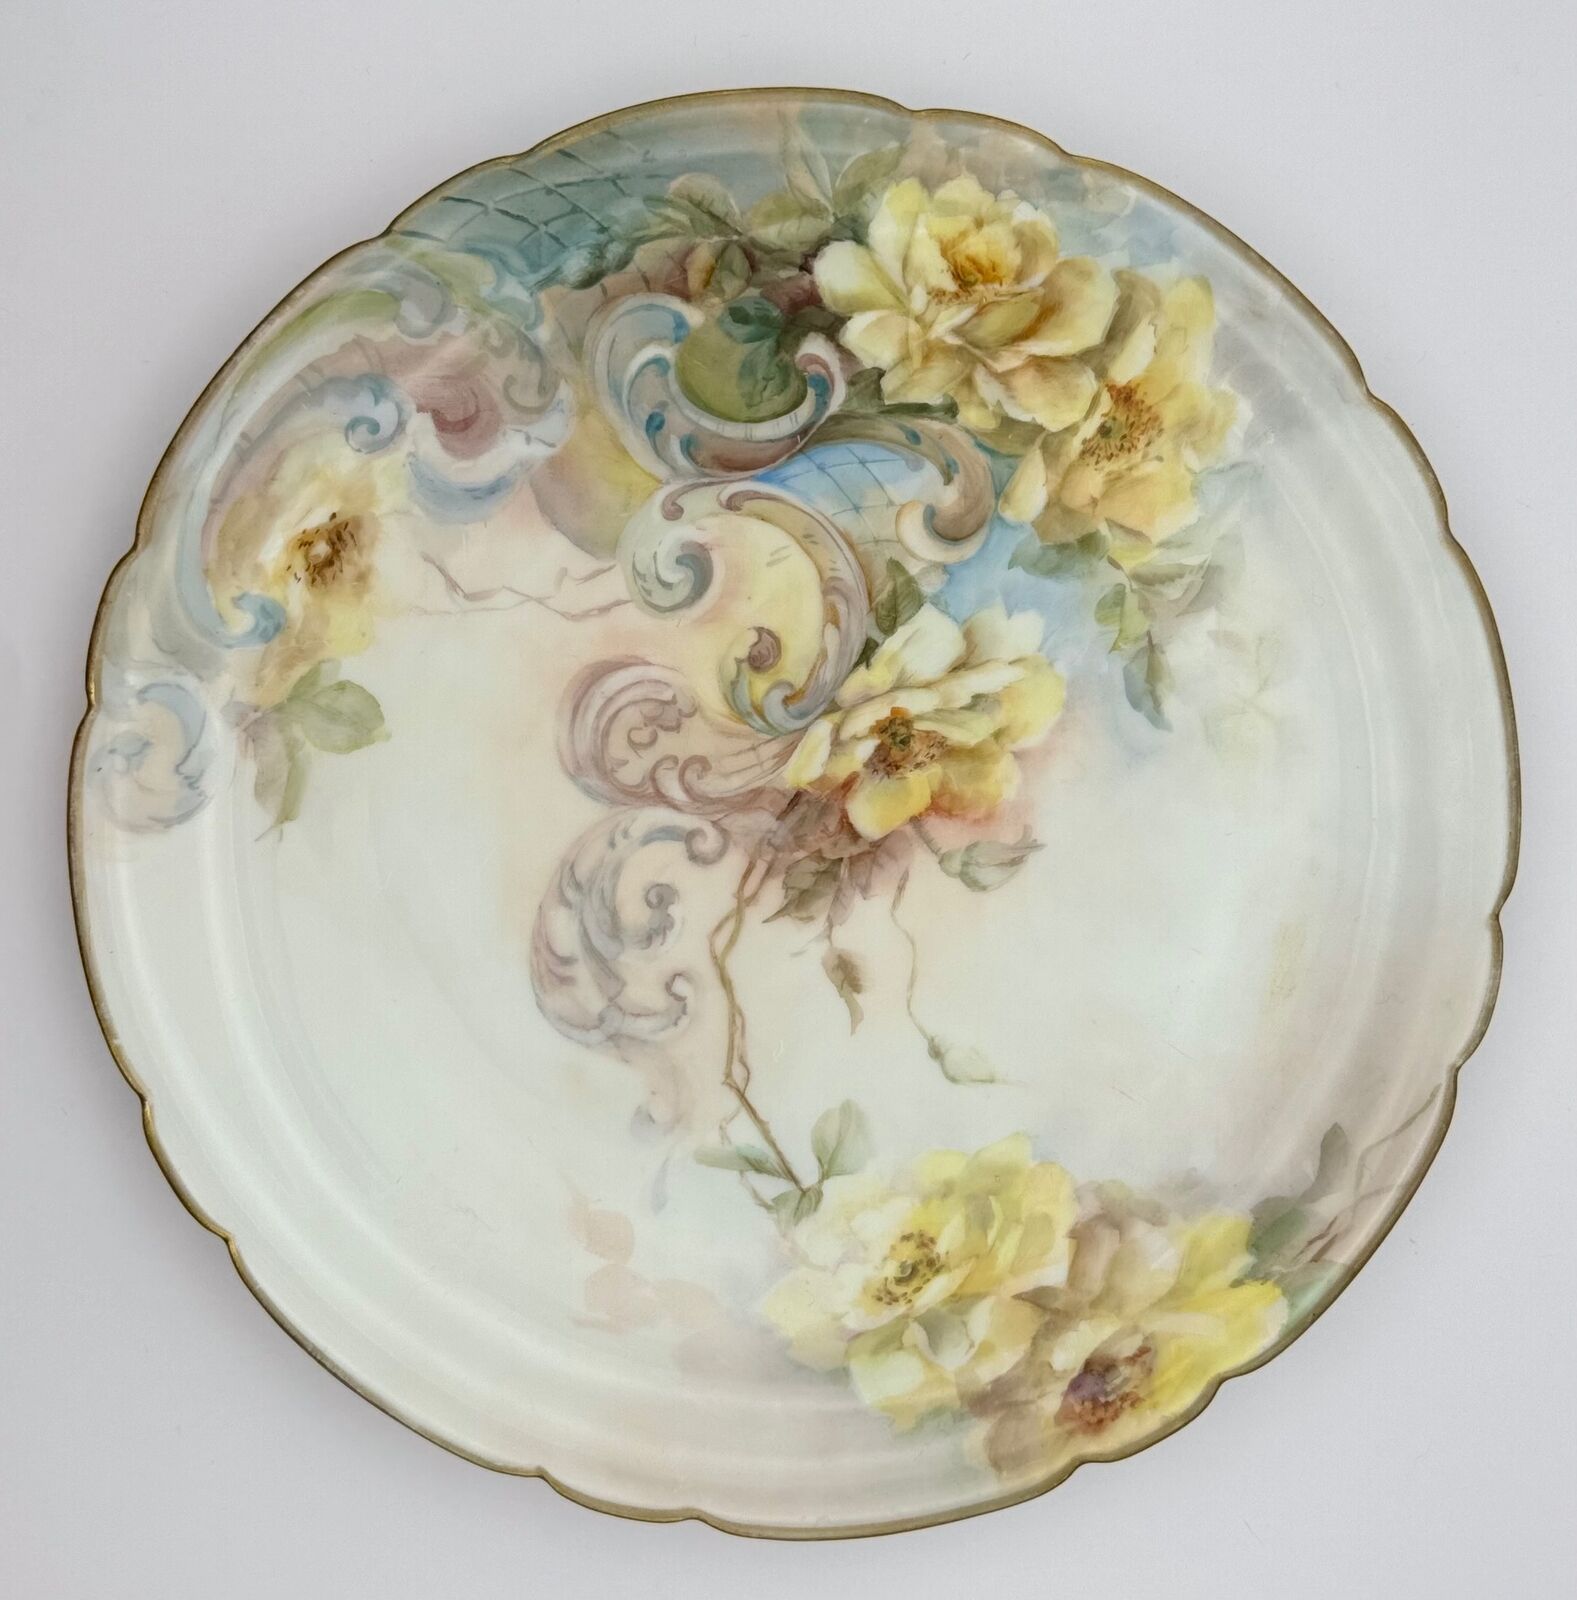 Antique Jean Pouyat Limoges France Hand-Painted Plate with Yellow Floral Design